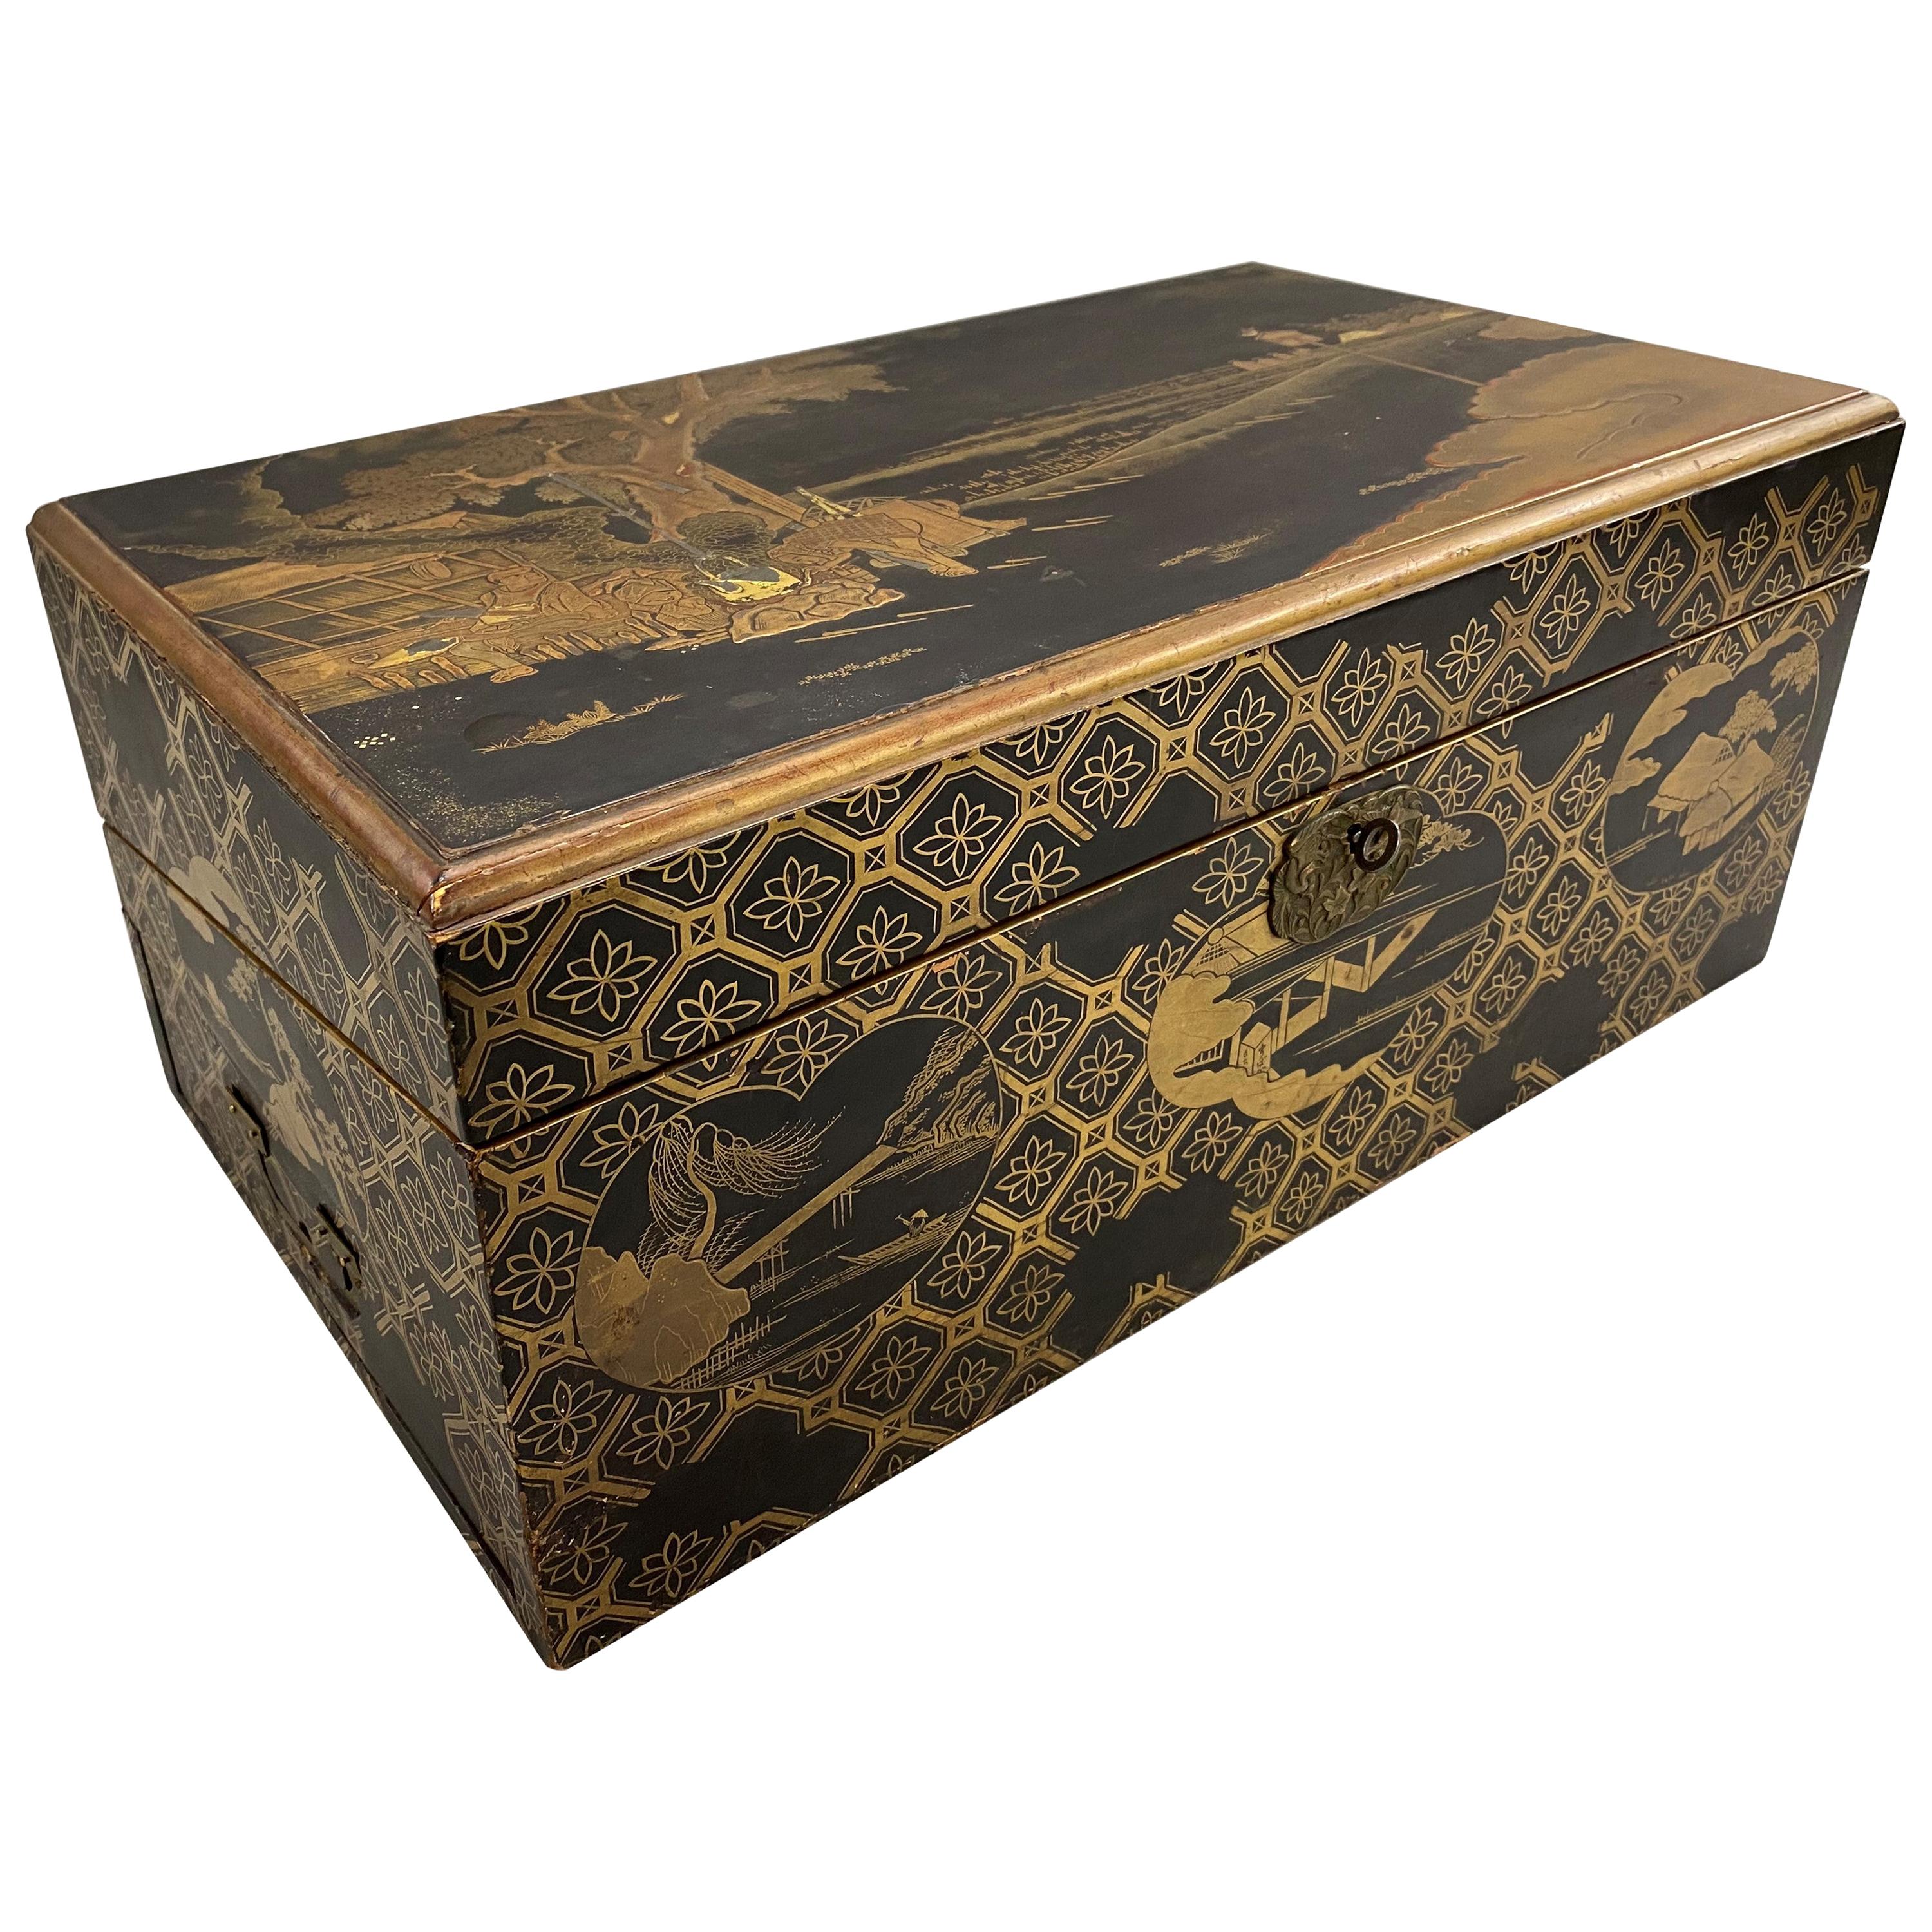 Japanese Meiji Period Carved and Gilt Lacquer Writing Box or Lap Desk